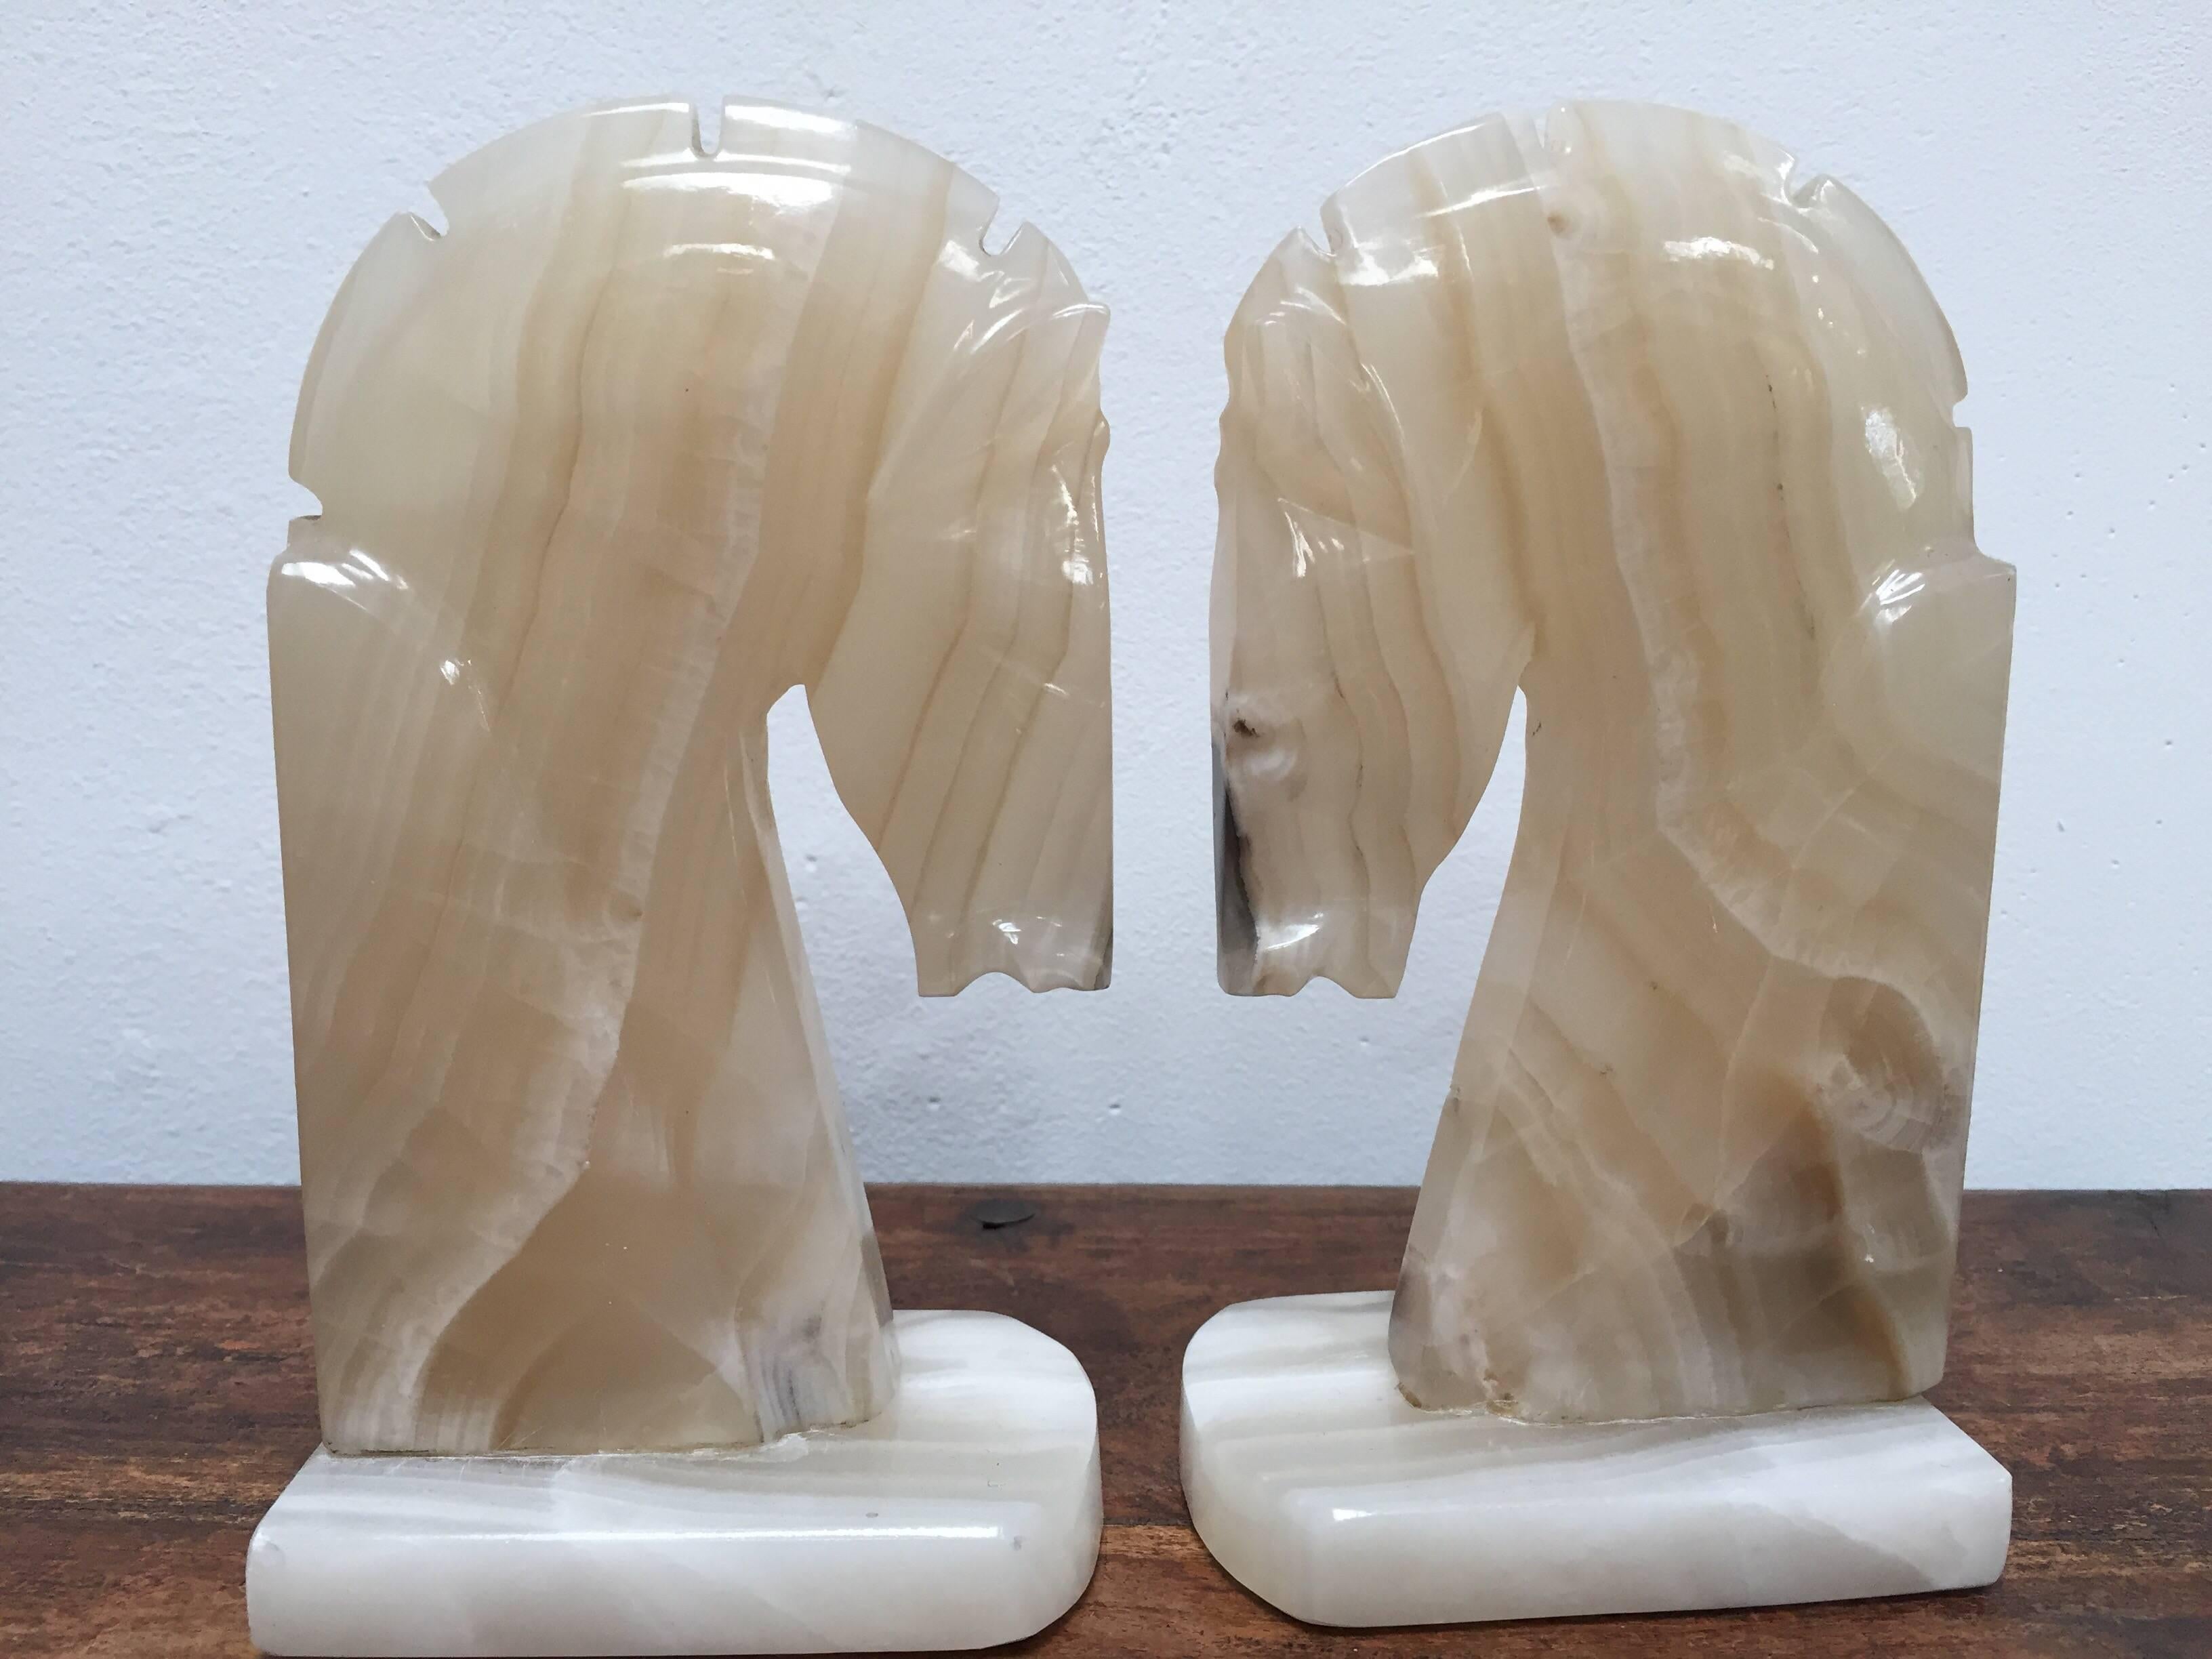 Pair of Art Deco style stylized horses head bookends.
Vintage set of bookends, hand-carved in onyx in a shade of ivory and browns.
Hermes style horses, great modern design.
Measures: Each horse head measure 7.5